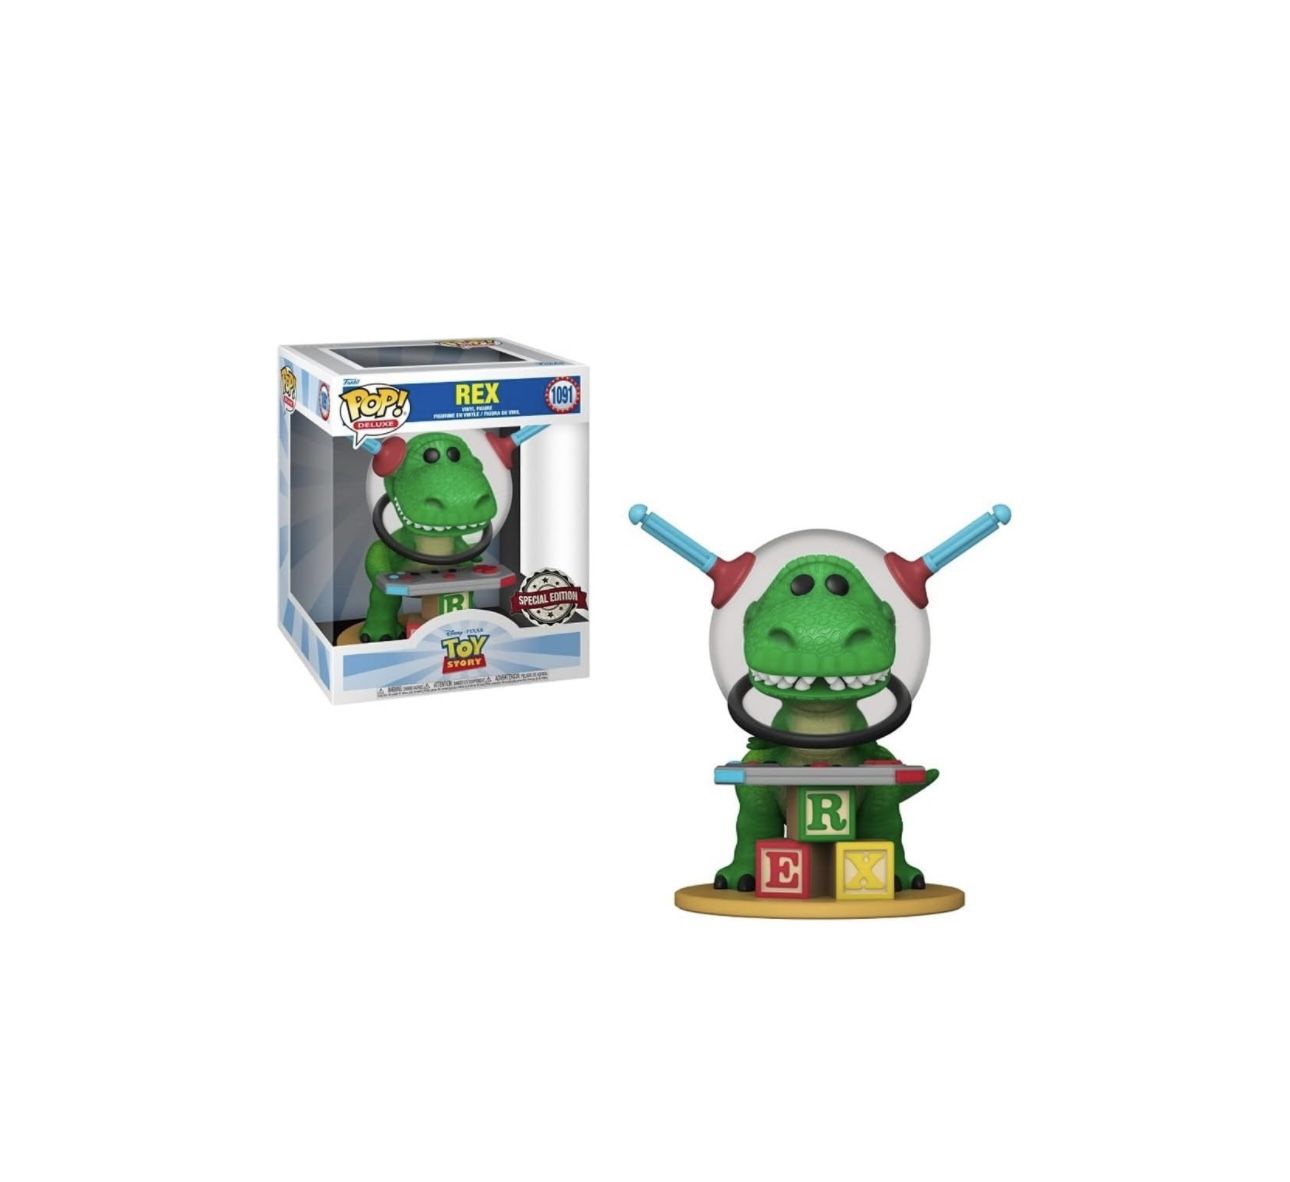 Funko Pop! Disney “Toy Story”, Deluxe, #1091 Rex, Special “Box Lunch” Sticker, New In Box, Great Gift 🎁 ($30 Pick Up Only)